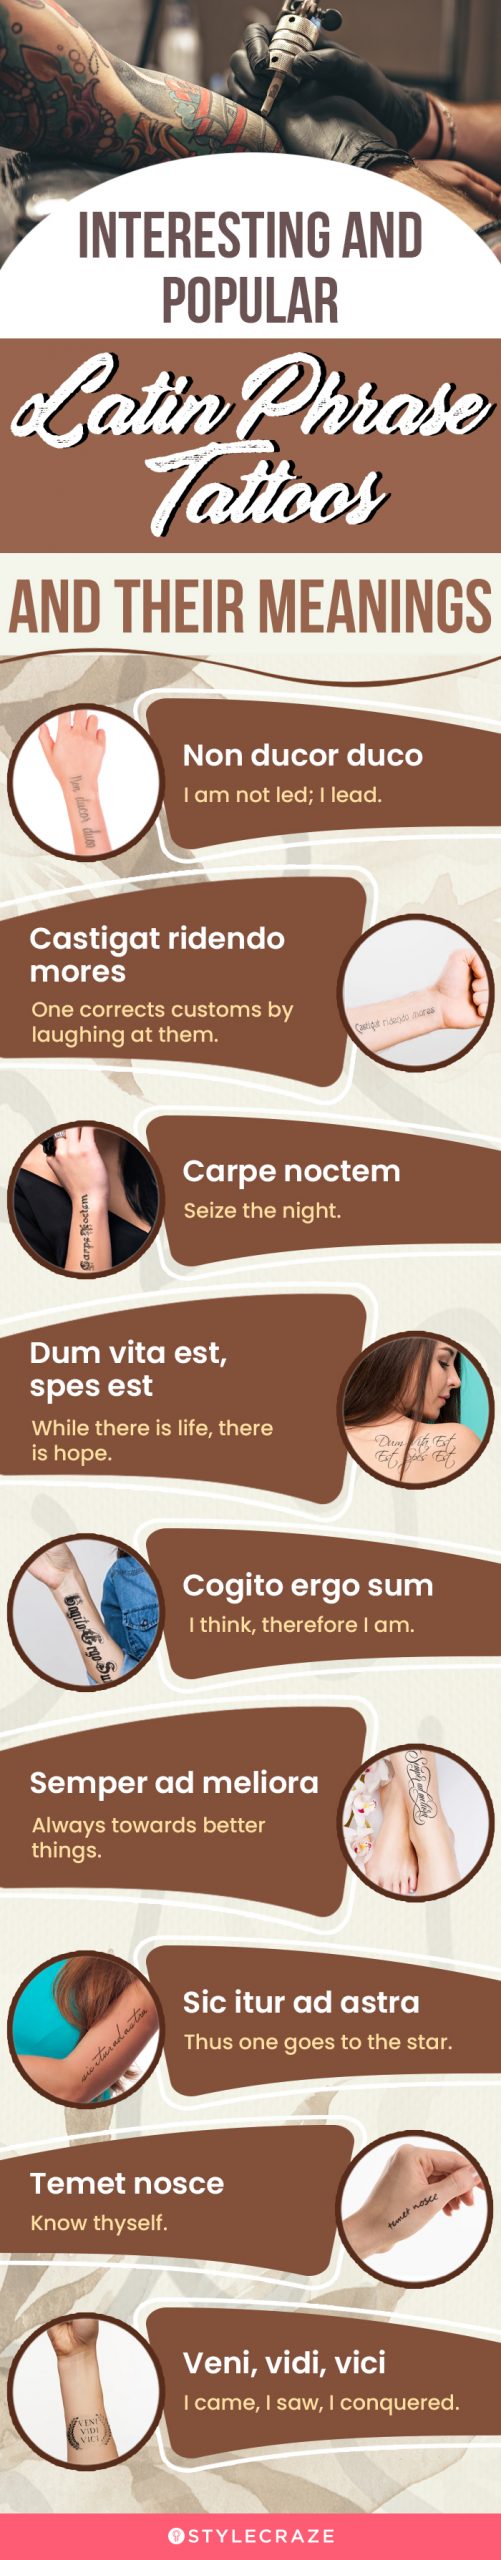 interesting and popular latin phrase tattoos and their meanings (infographic)